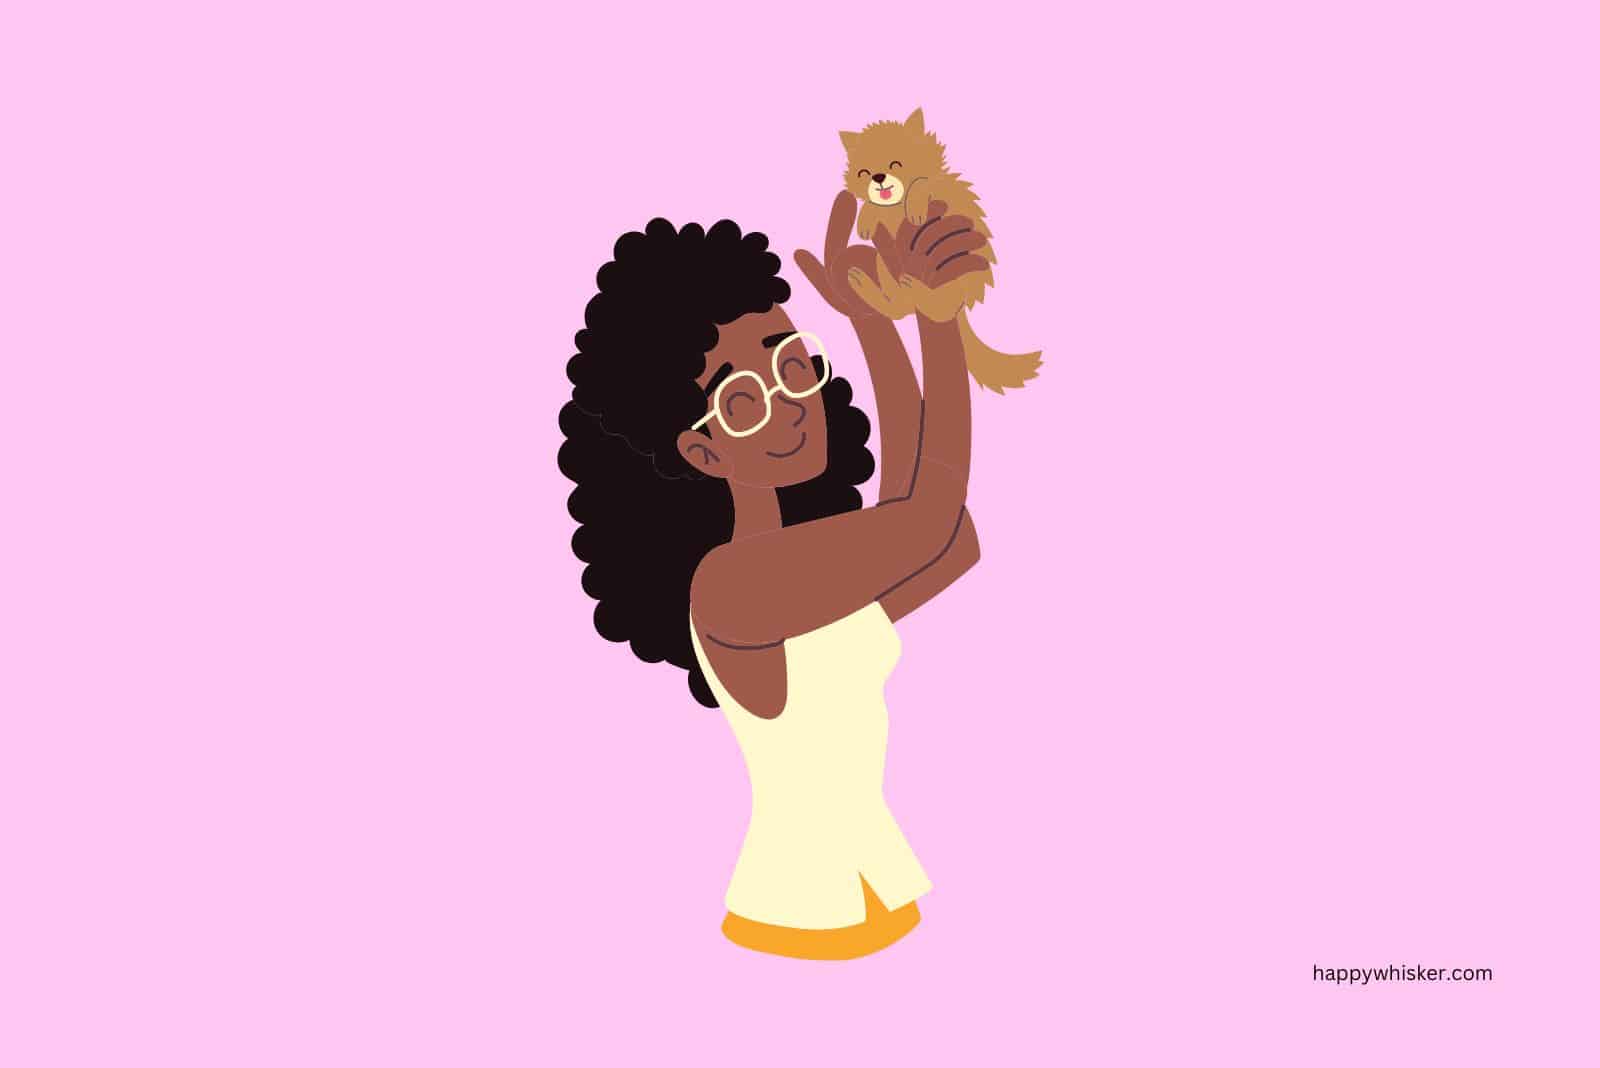 cute illustration of woman hodling a cat